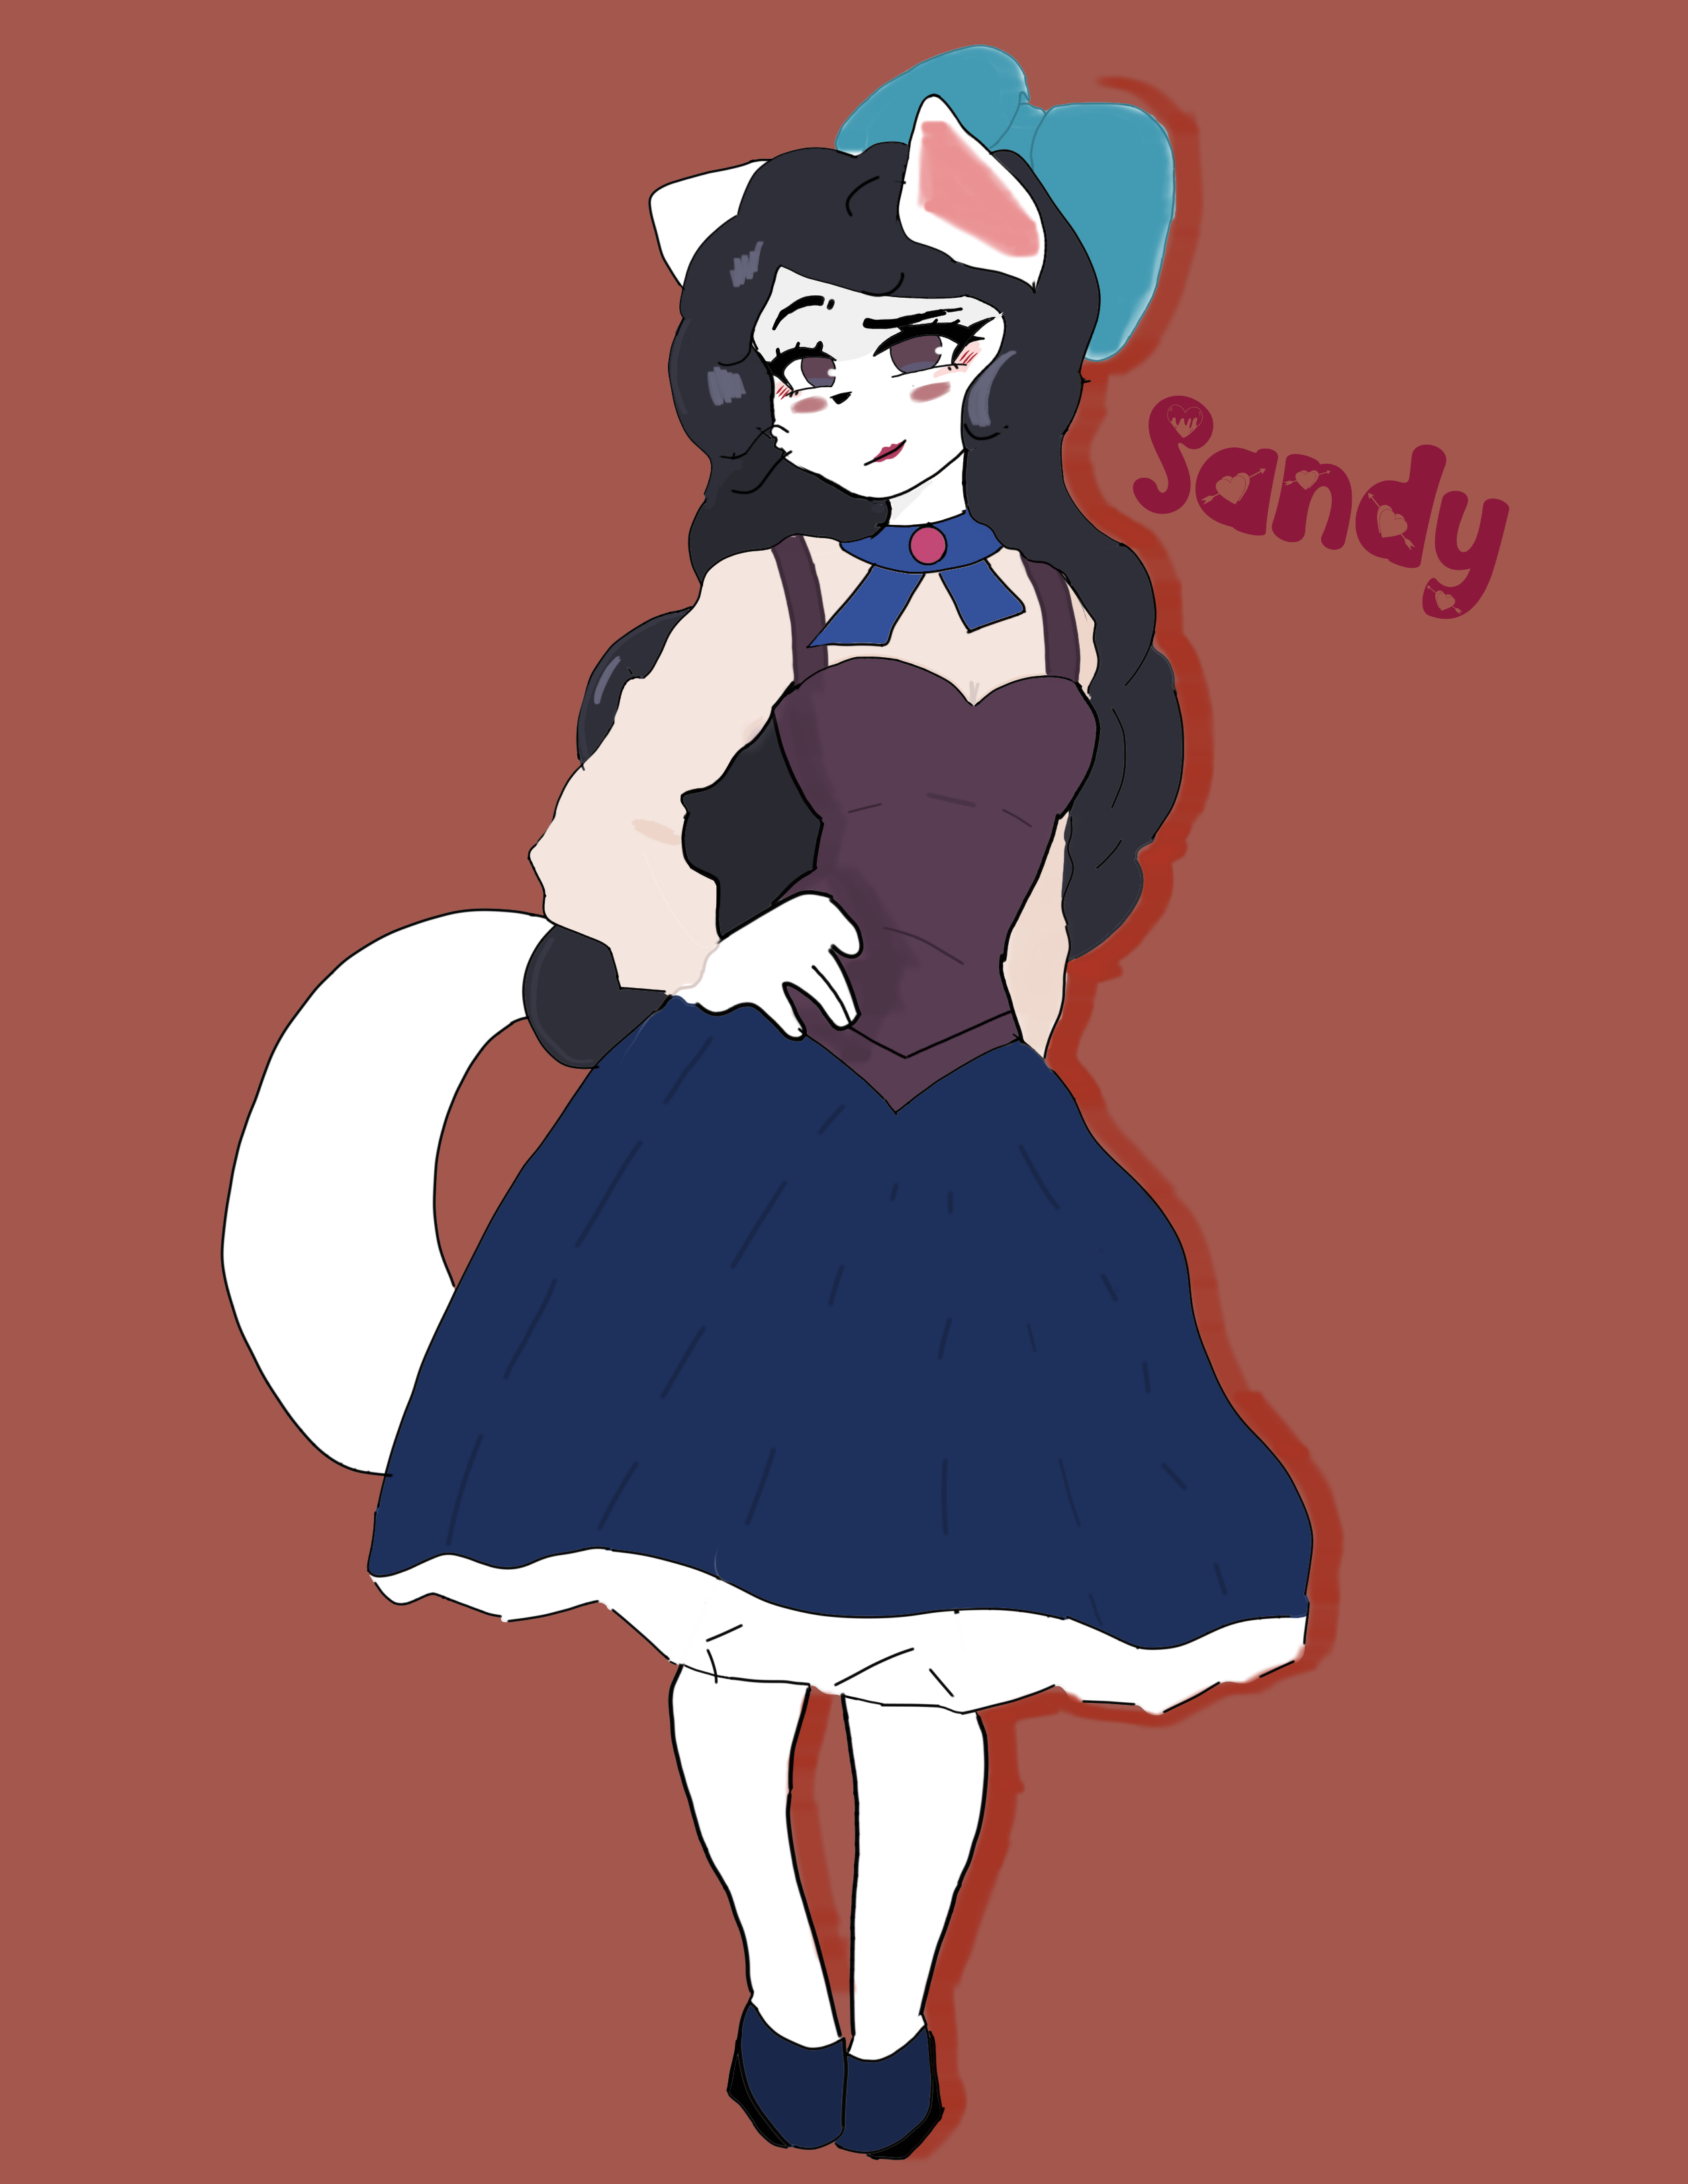 Candybooru image #16499, tagged with Narrator_(Artist) Sandy